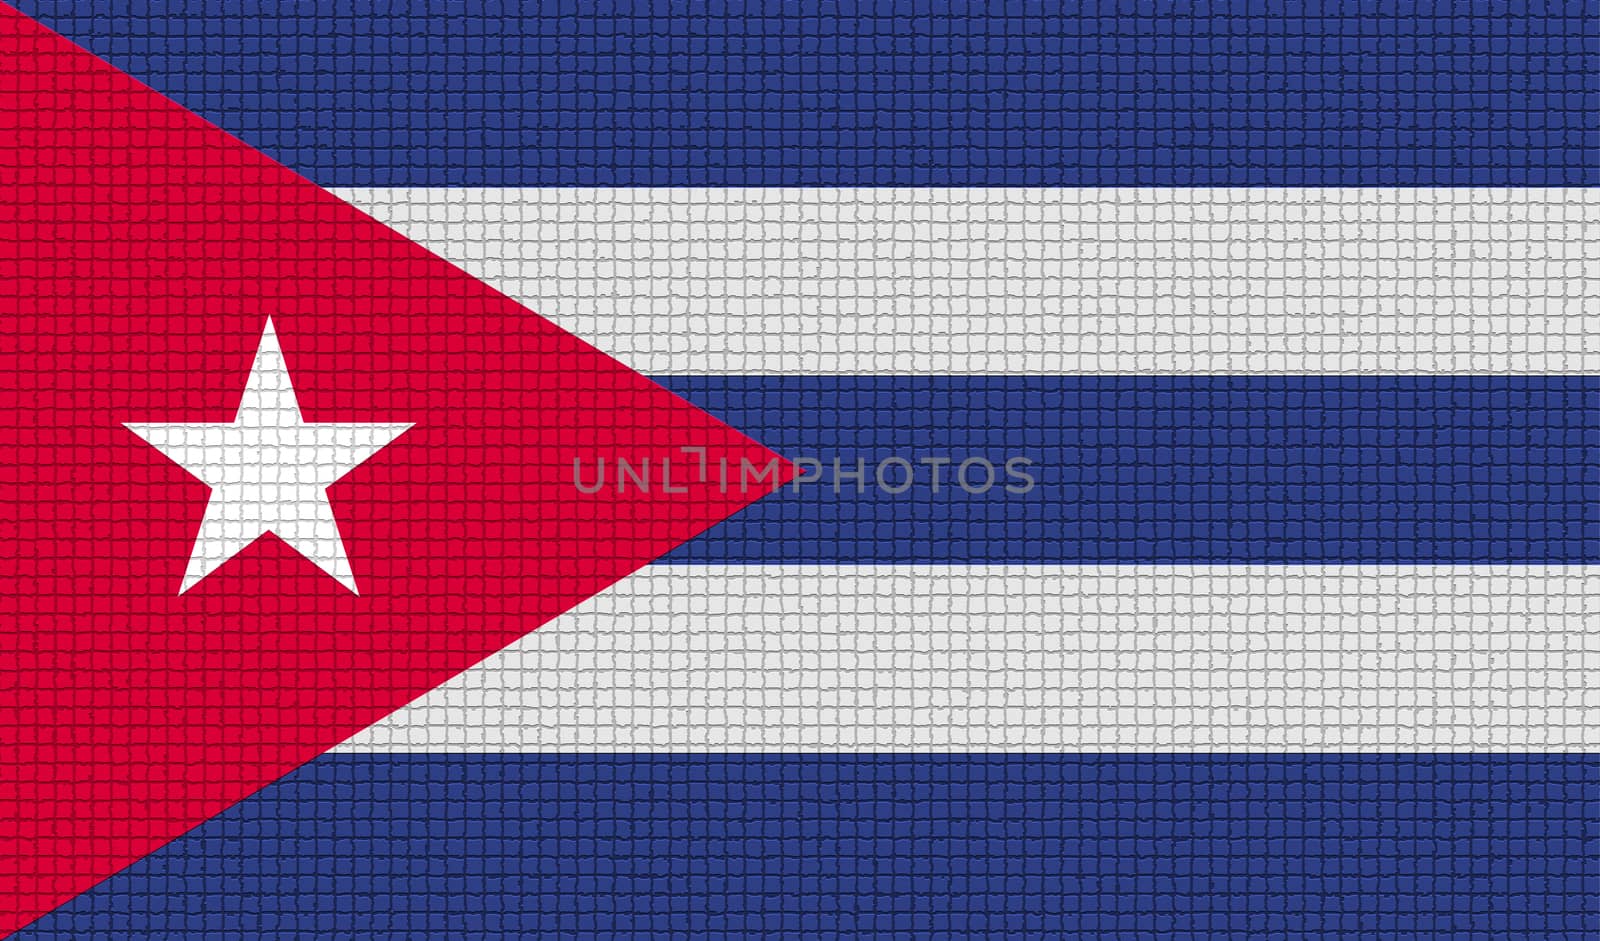 Flags of Cuba with abstract textures. Rasterized version